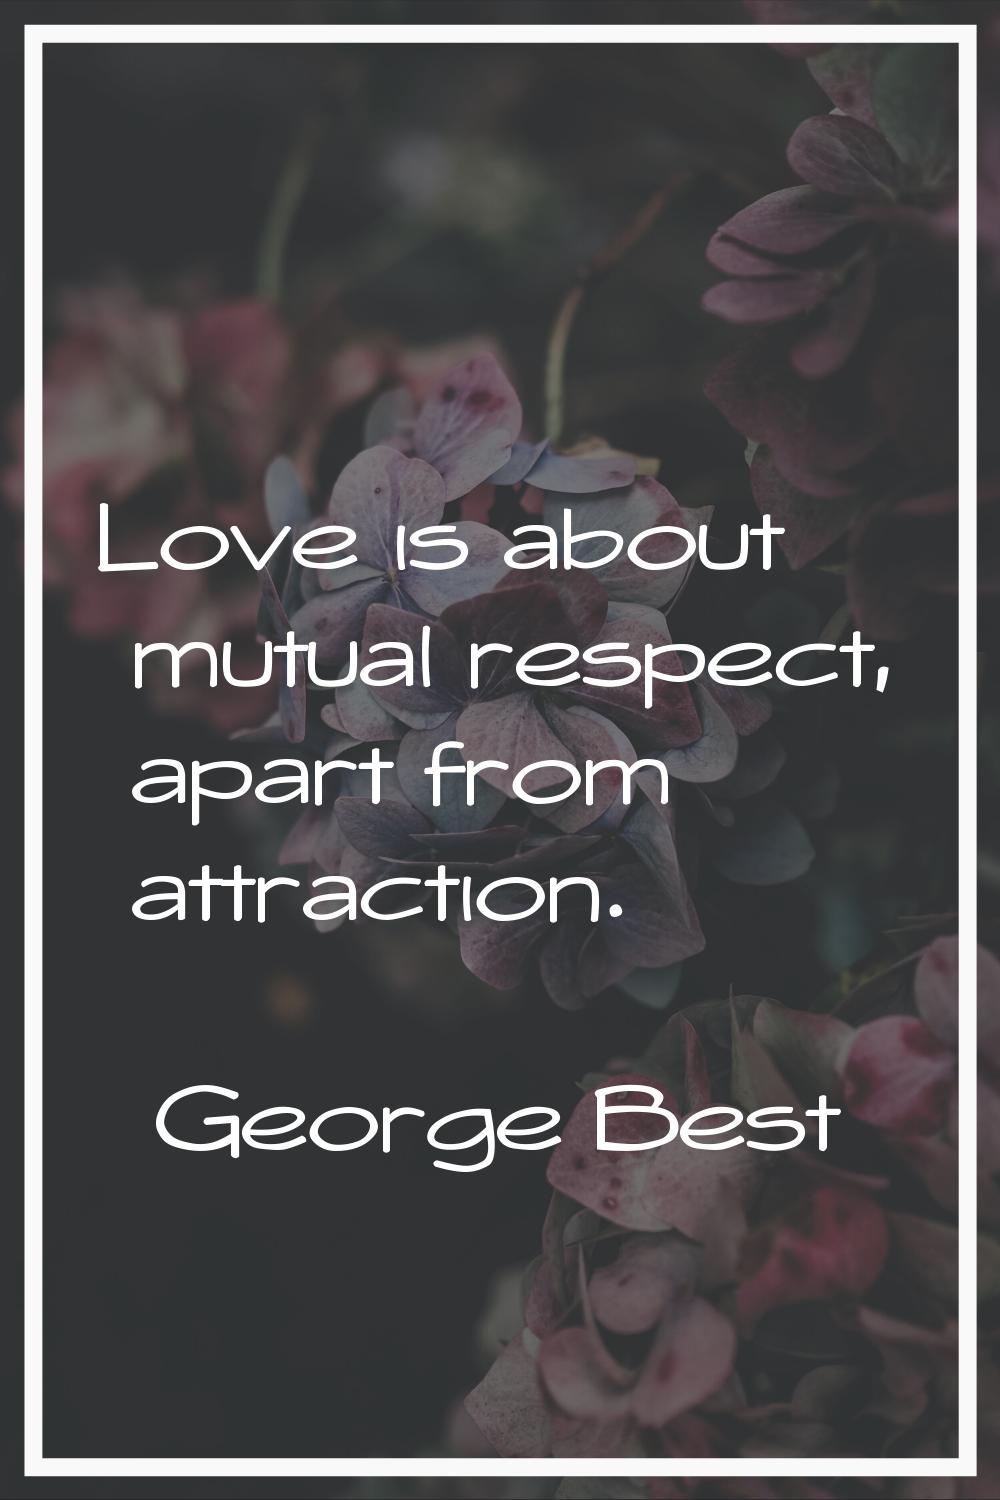 Love is about mutual respect, apart from attraction.